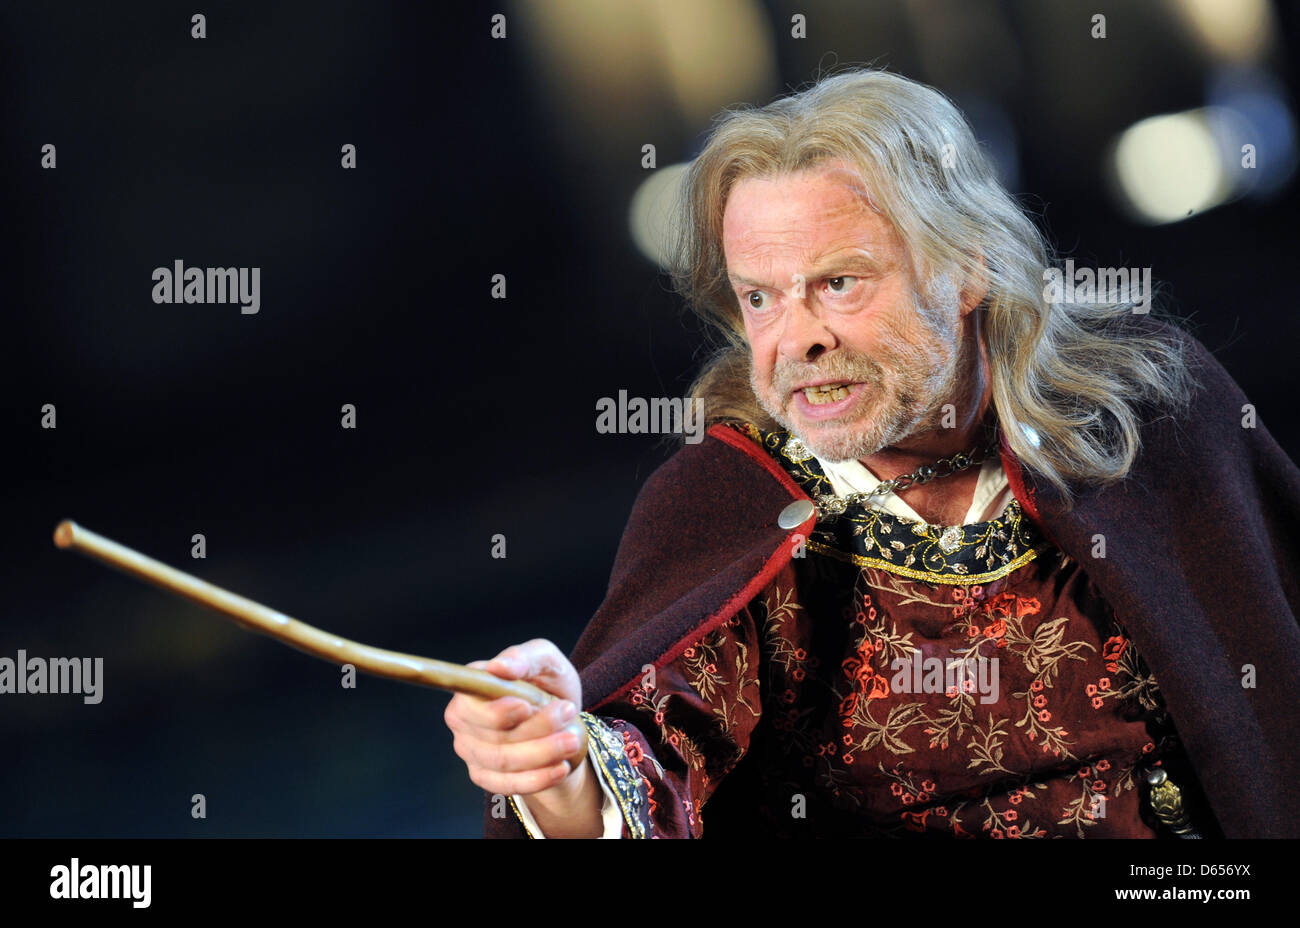 Actor Volker Lechtenbrink as King Lear and performs the play 'King Lear' during a photo rehearsal at the Bad Hersfeld Festival in Bad Hersfeld, Germany, 12 June 2012. The Shakespeare tragedy in a production by Volker Lechtenbrink will premiere on 15 June 2012 at the 62nd Bad Hersfeld FGestival. Photo: UWE ZUCCHI Stock Photo